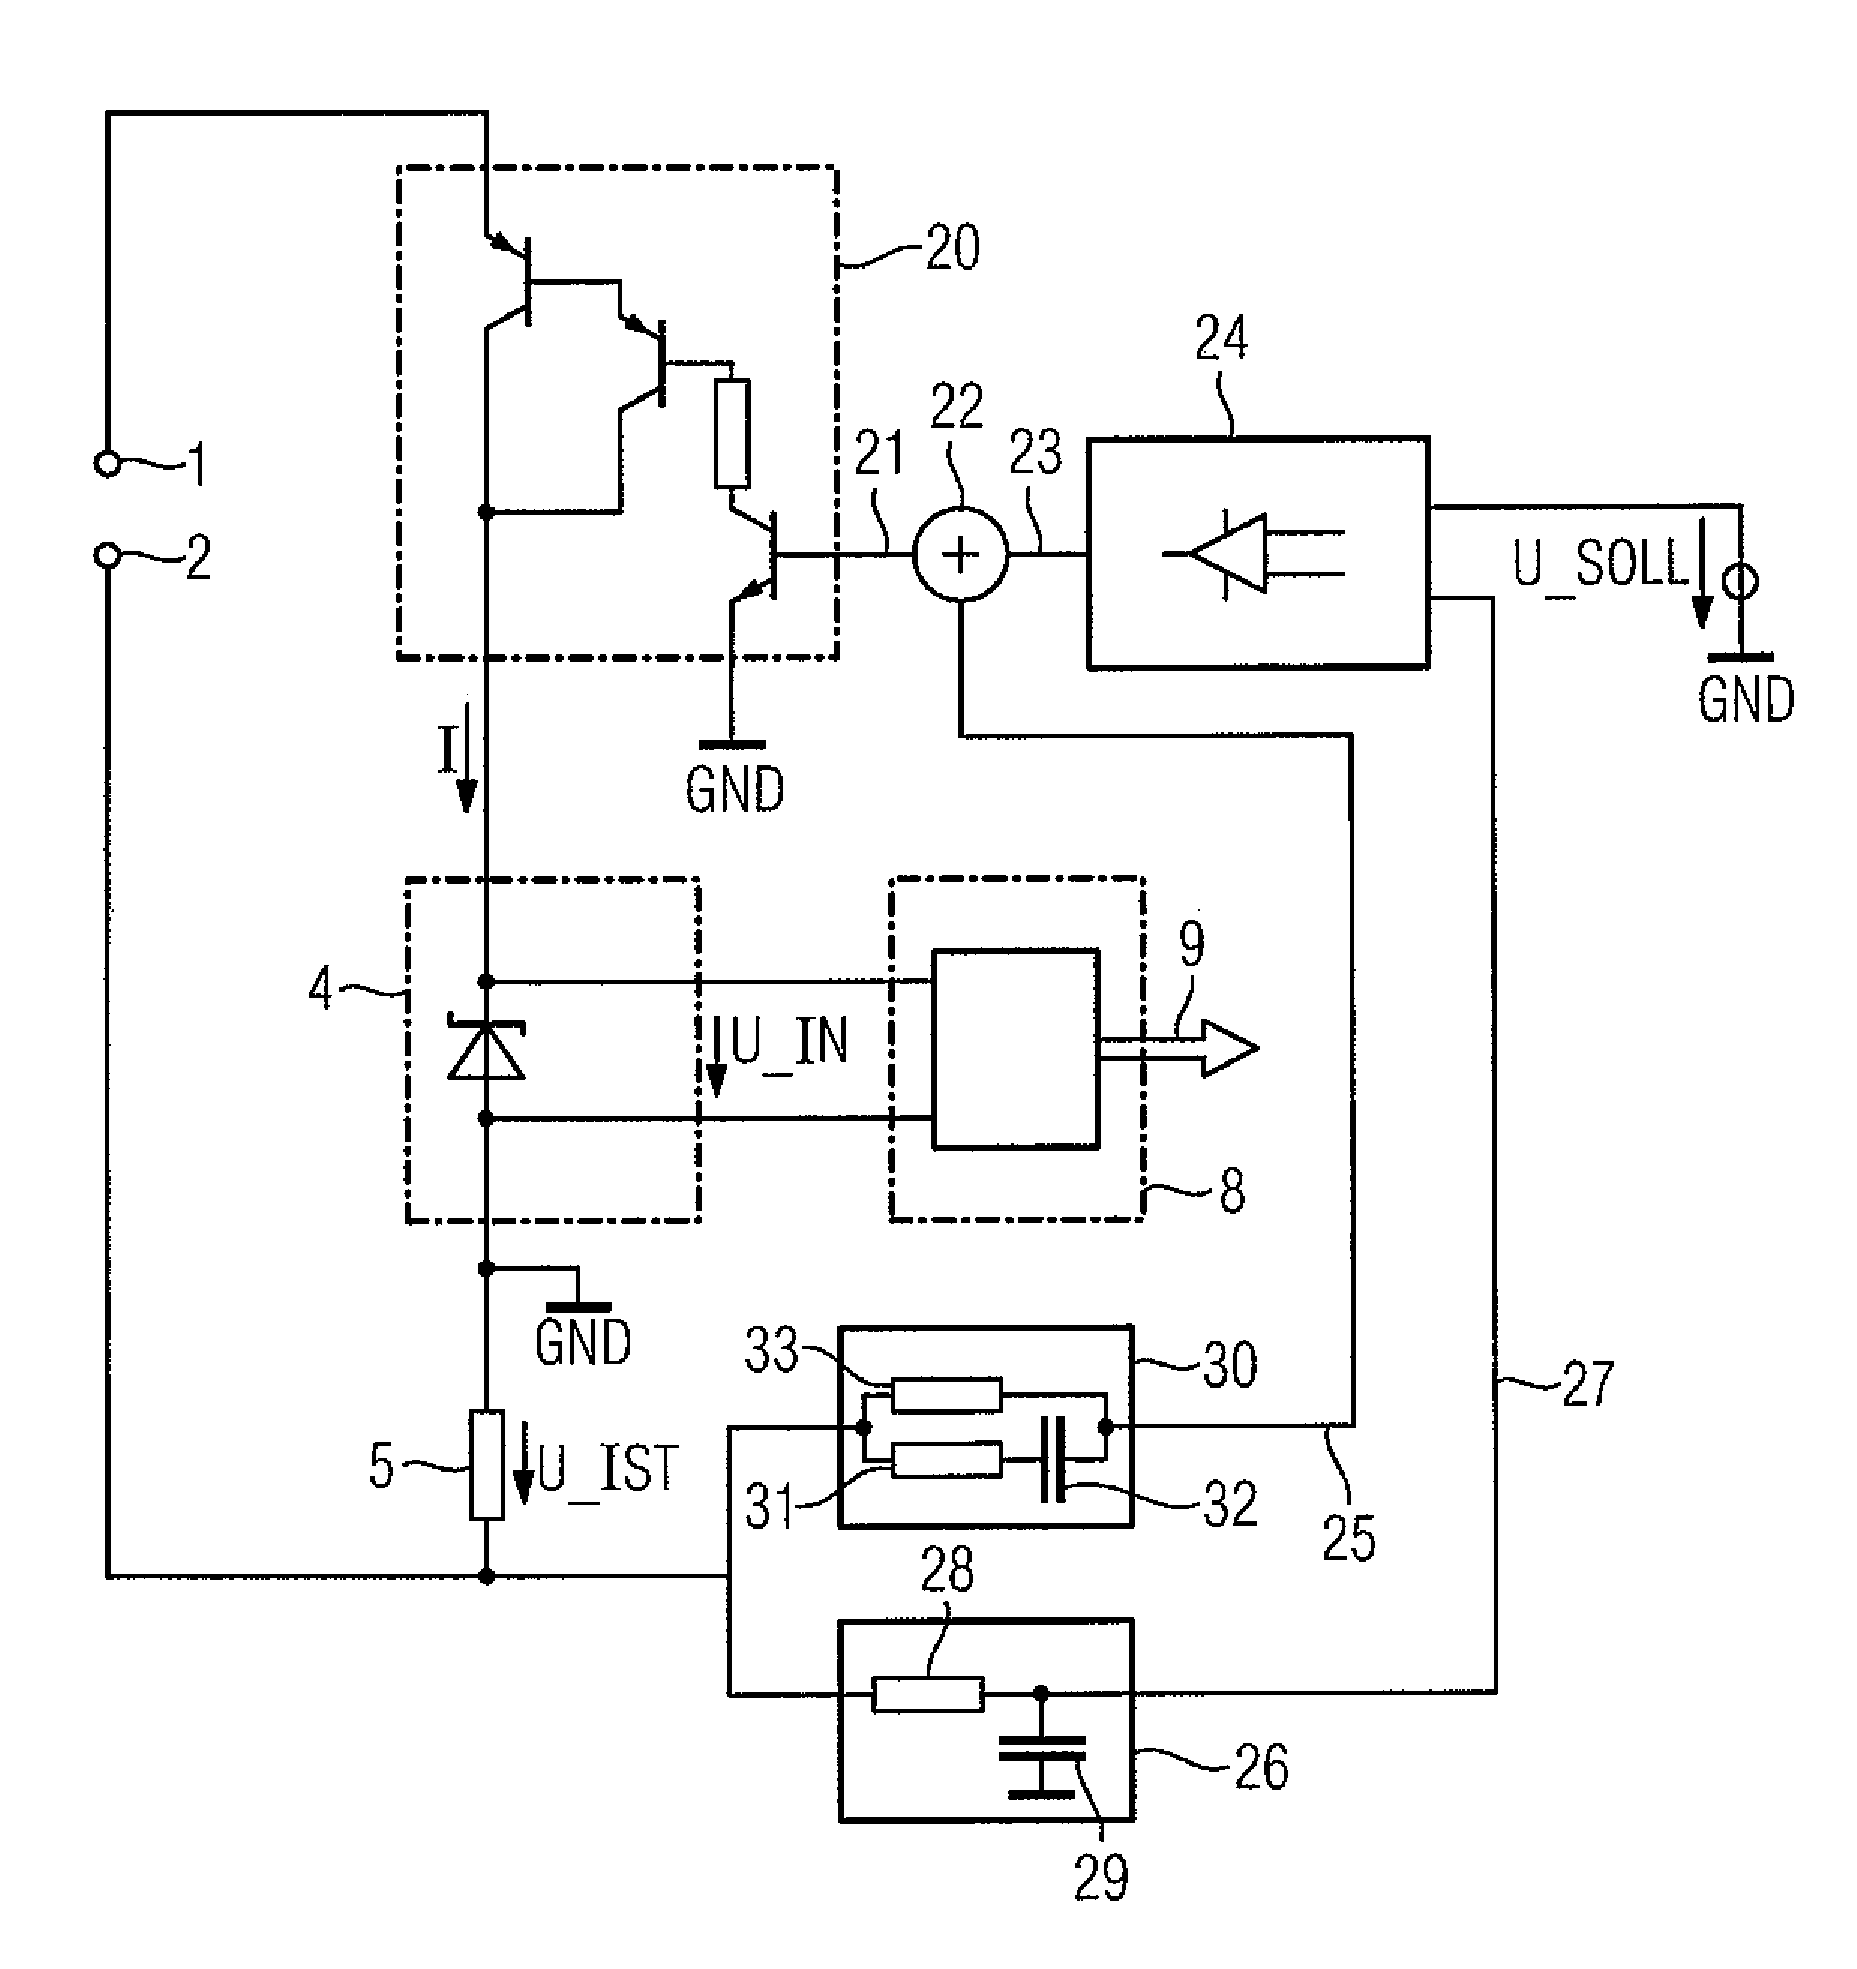 Field device for process instrumentation